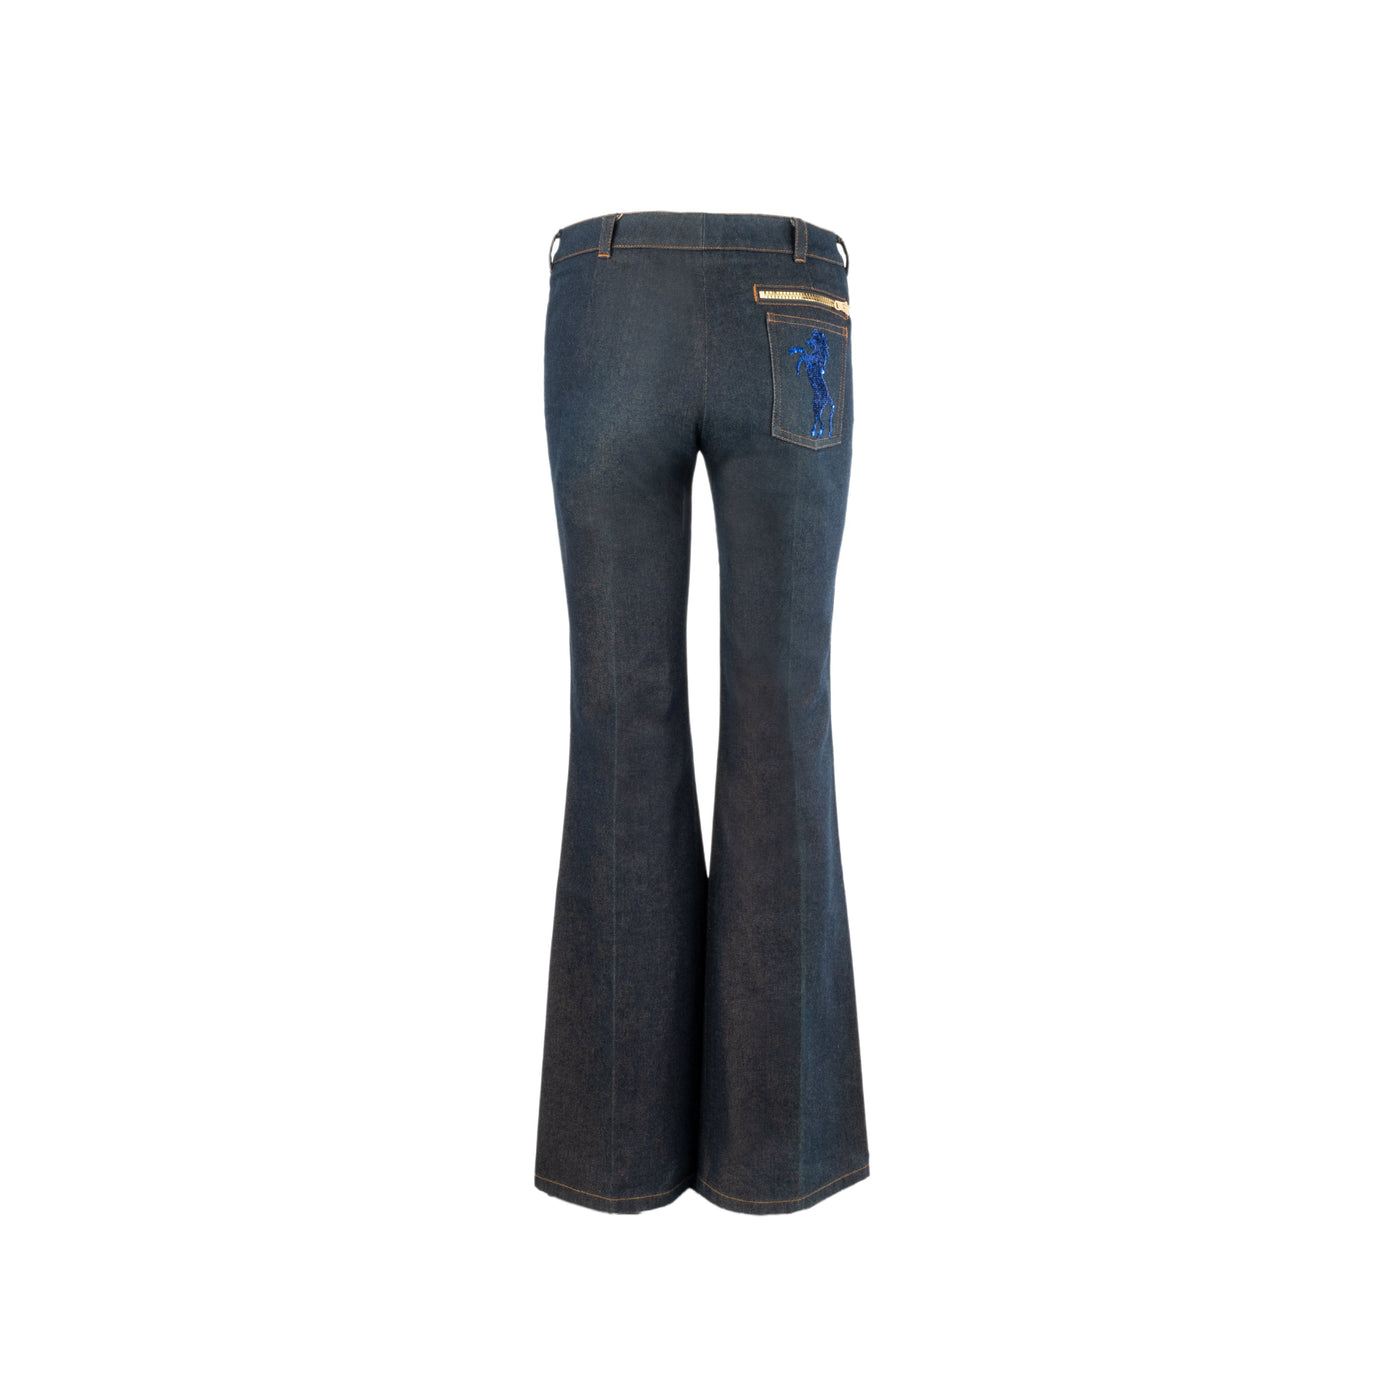 Chloé dark wash jeans flared pre-owned